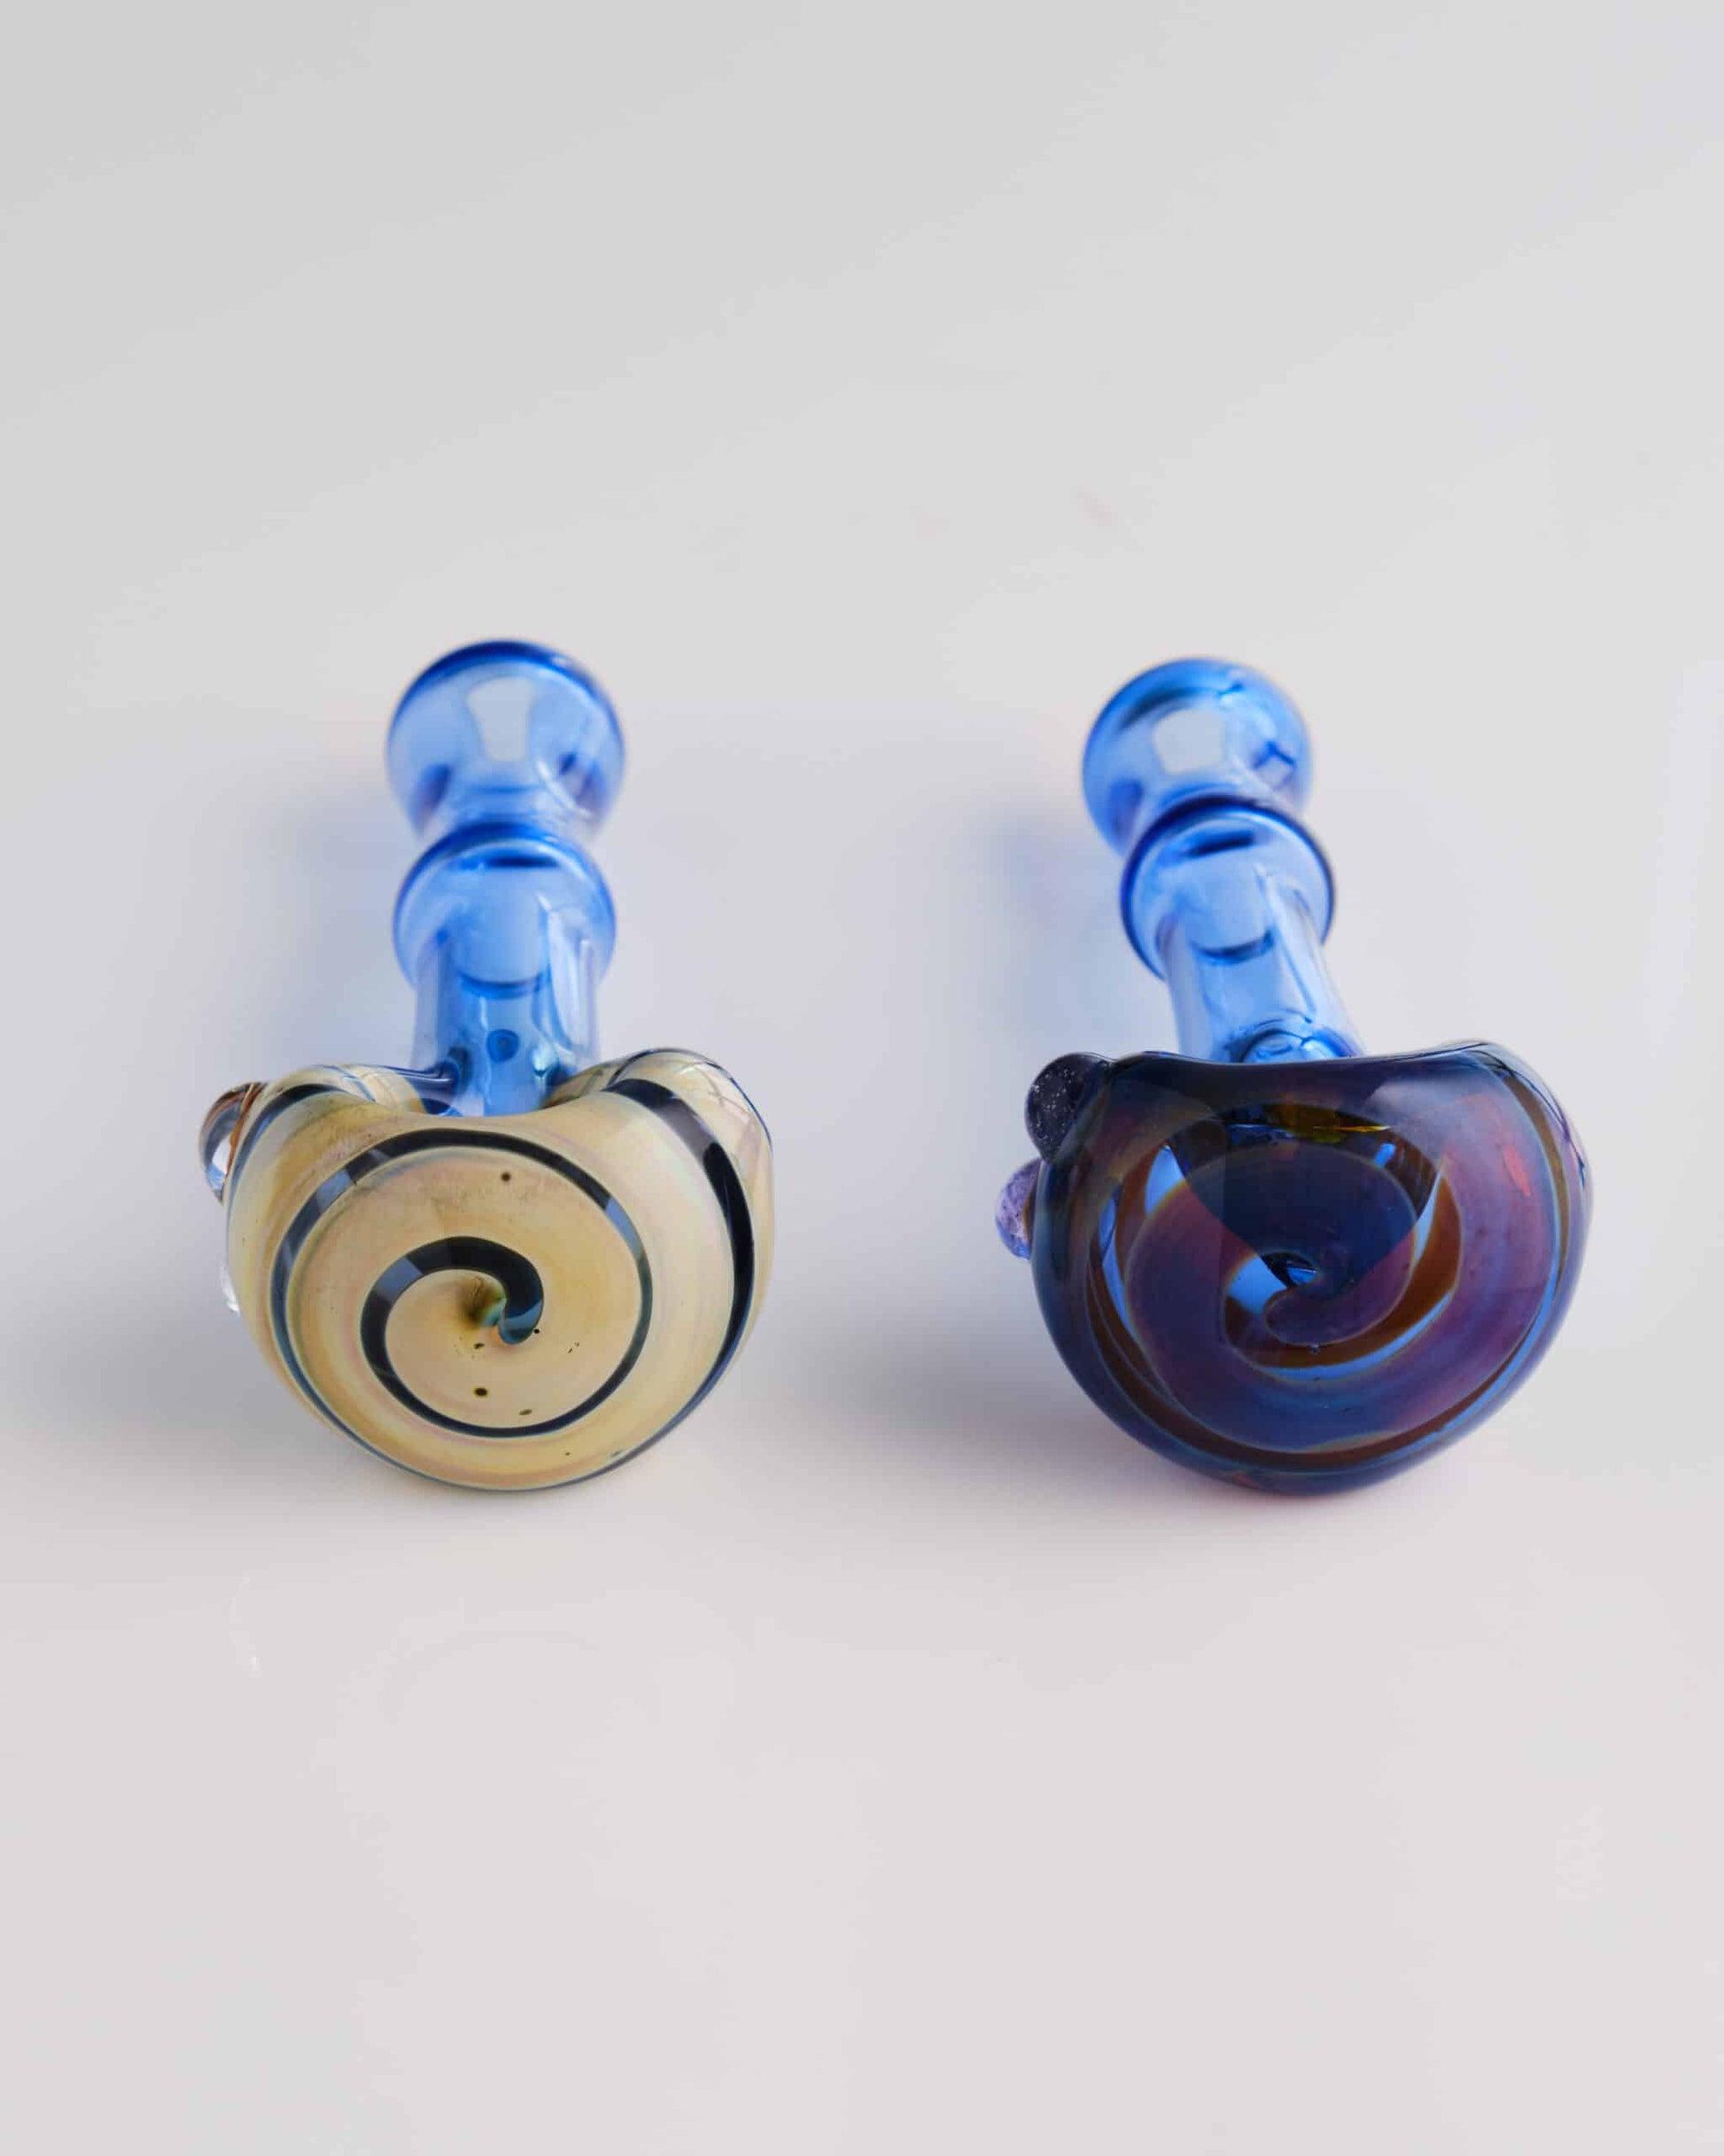 luxurious design of the Blue Spoon Pipe w/ Yellow Swirl by Willy That Glass Guy